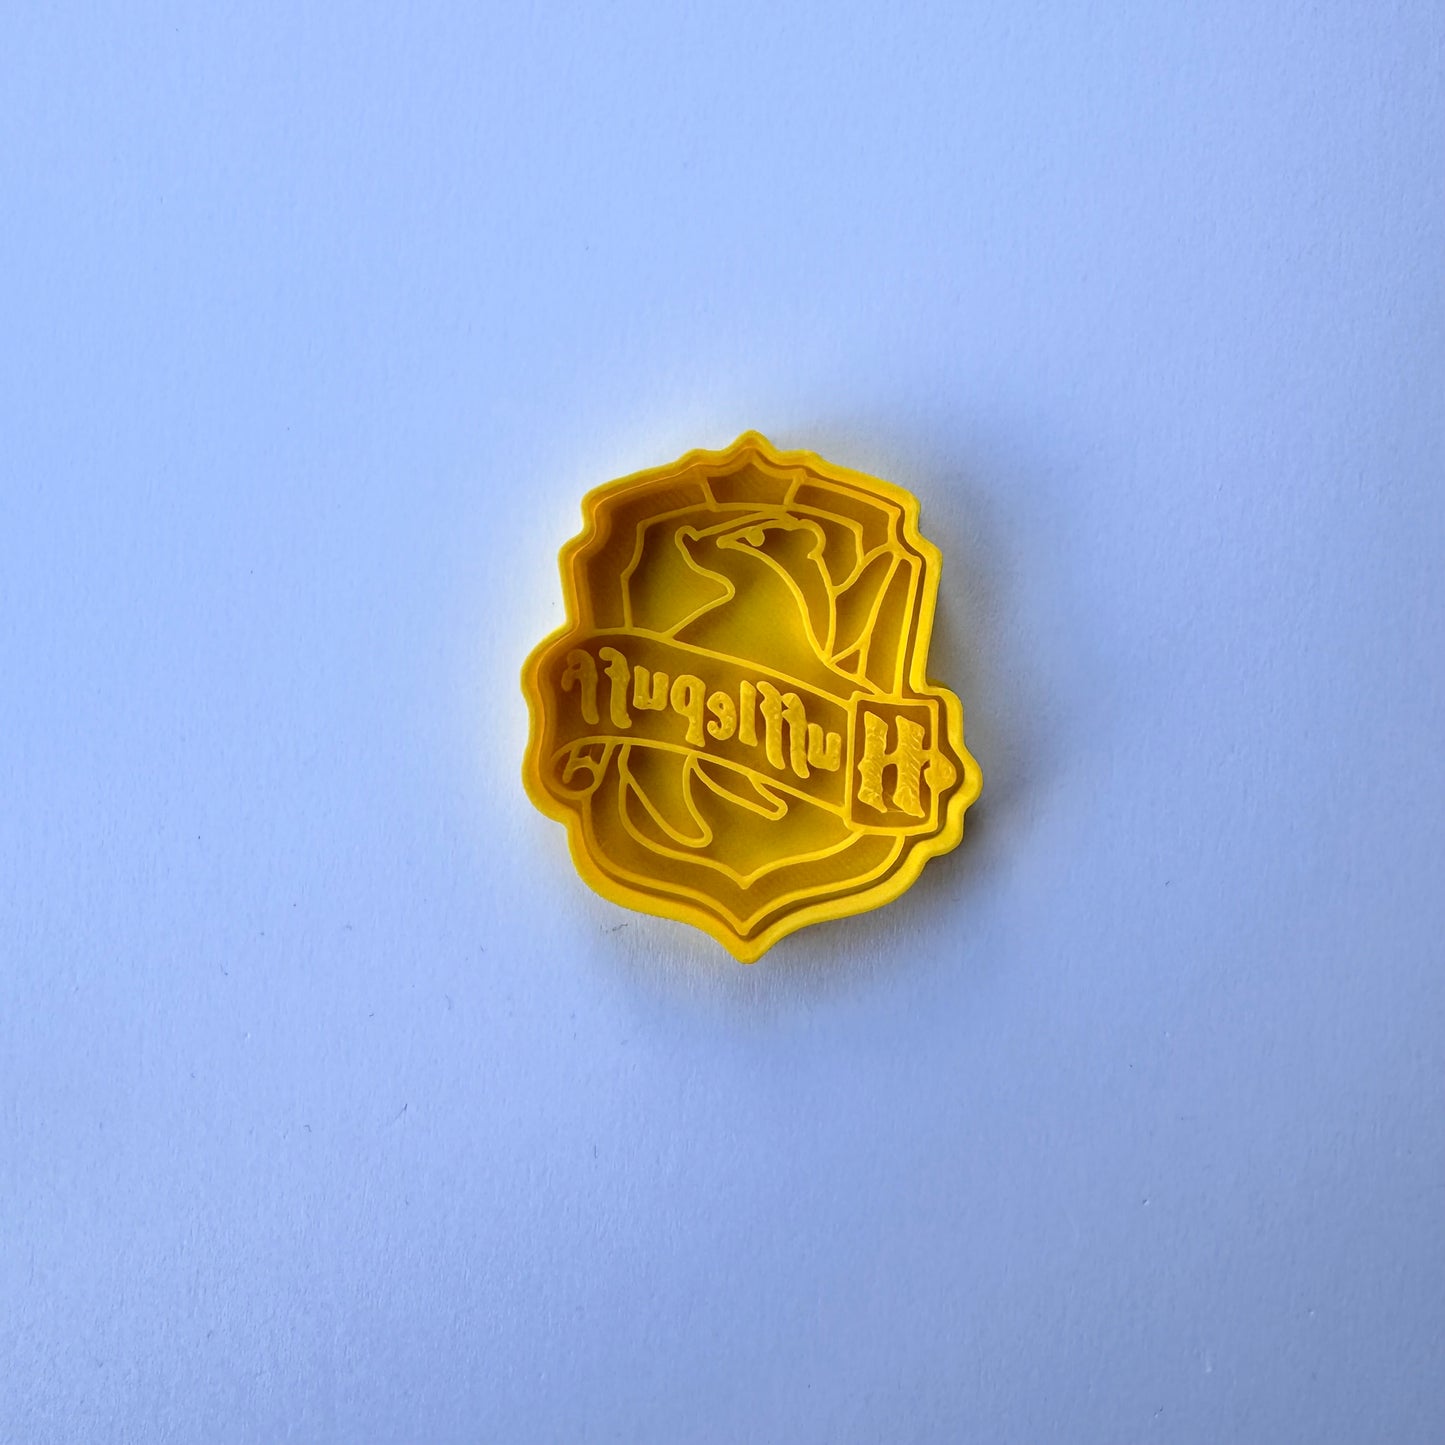 Hufflepuff badge Harry Potter-inspired Cookie Cutter Fondant Cake Decorating